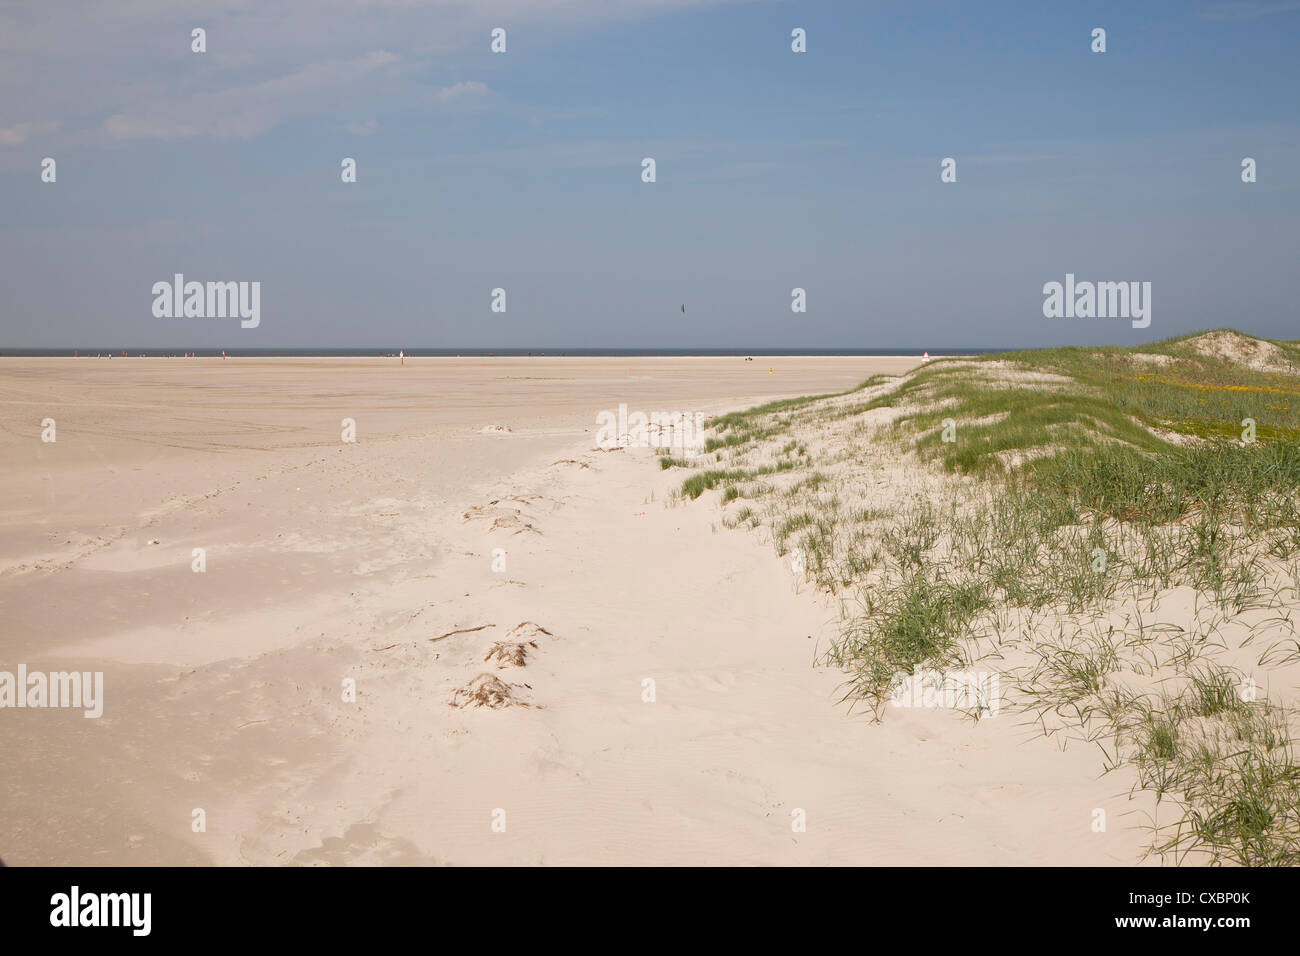 The long wide sandy beach of St. Peter-Ording, district of North Friesland, Schleswig-Holstein, Germany, Europe Stock Photo